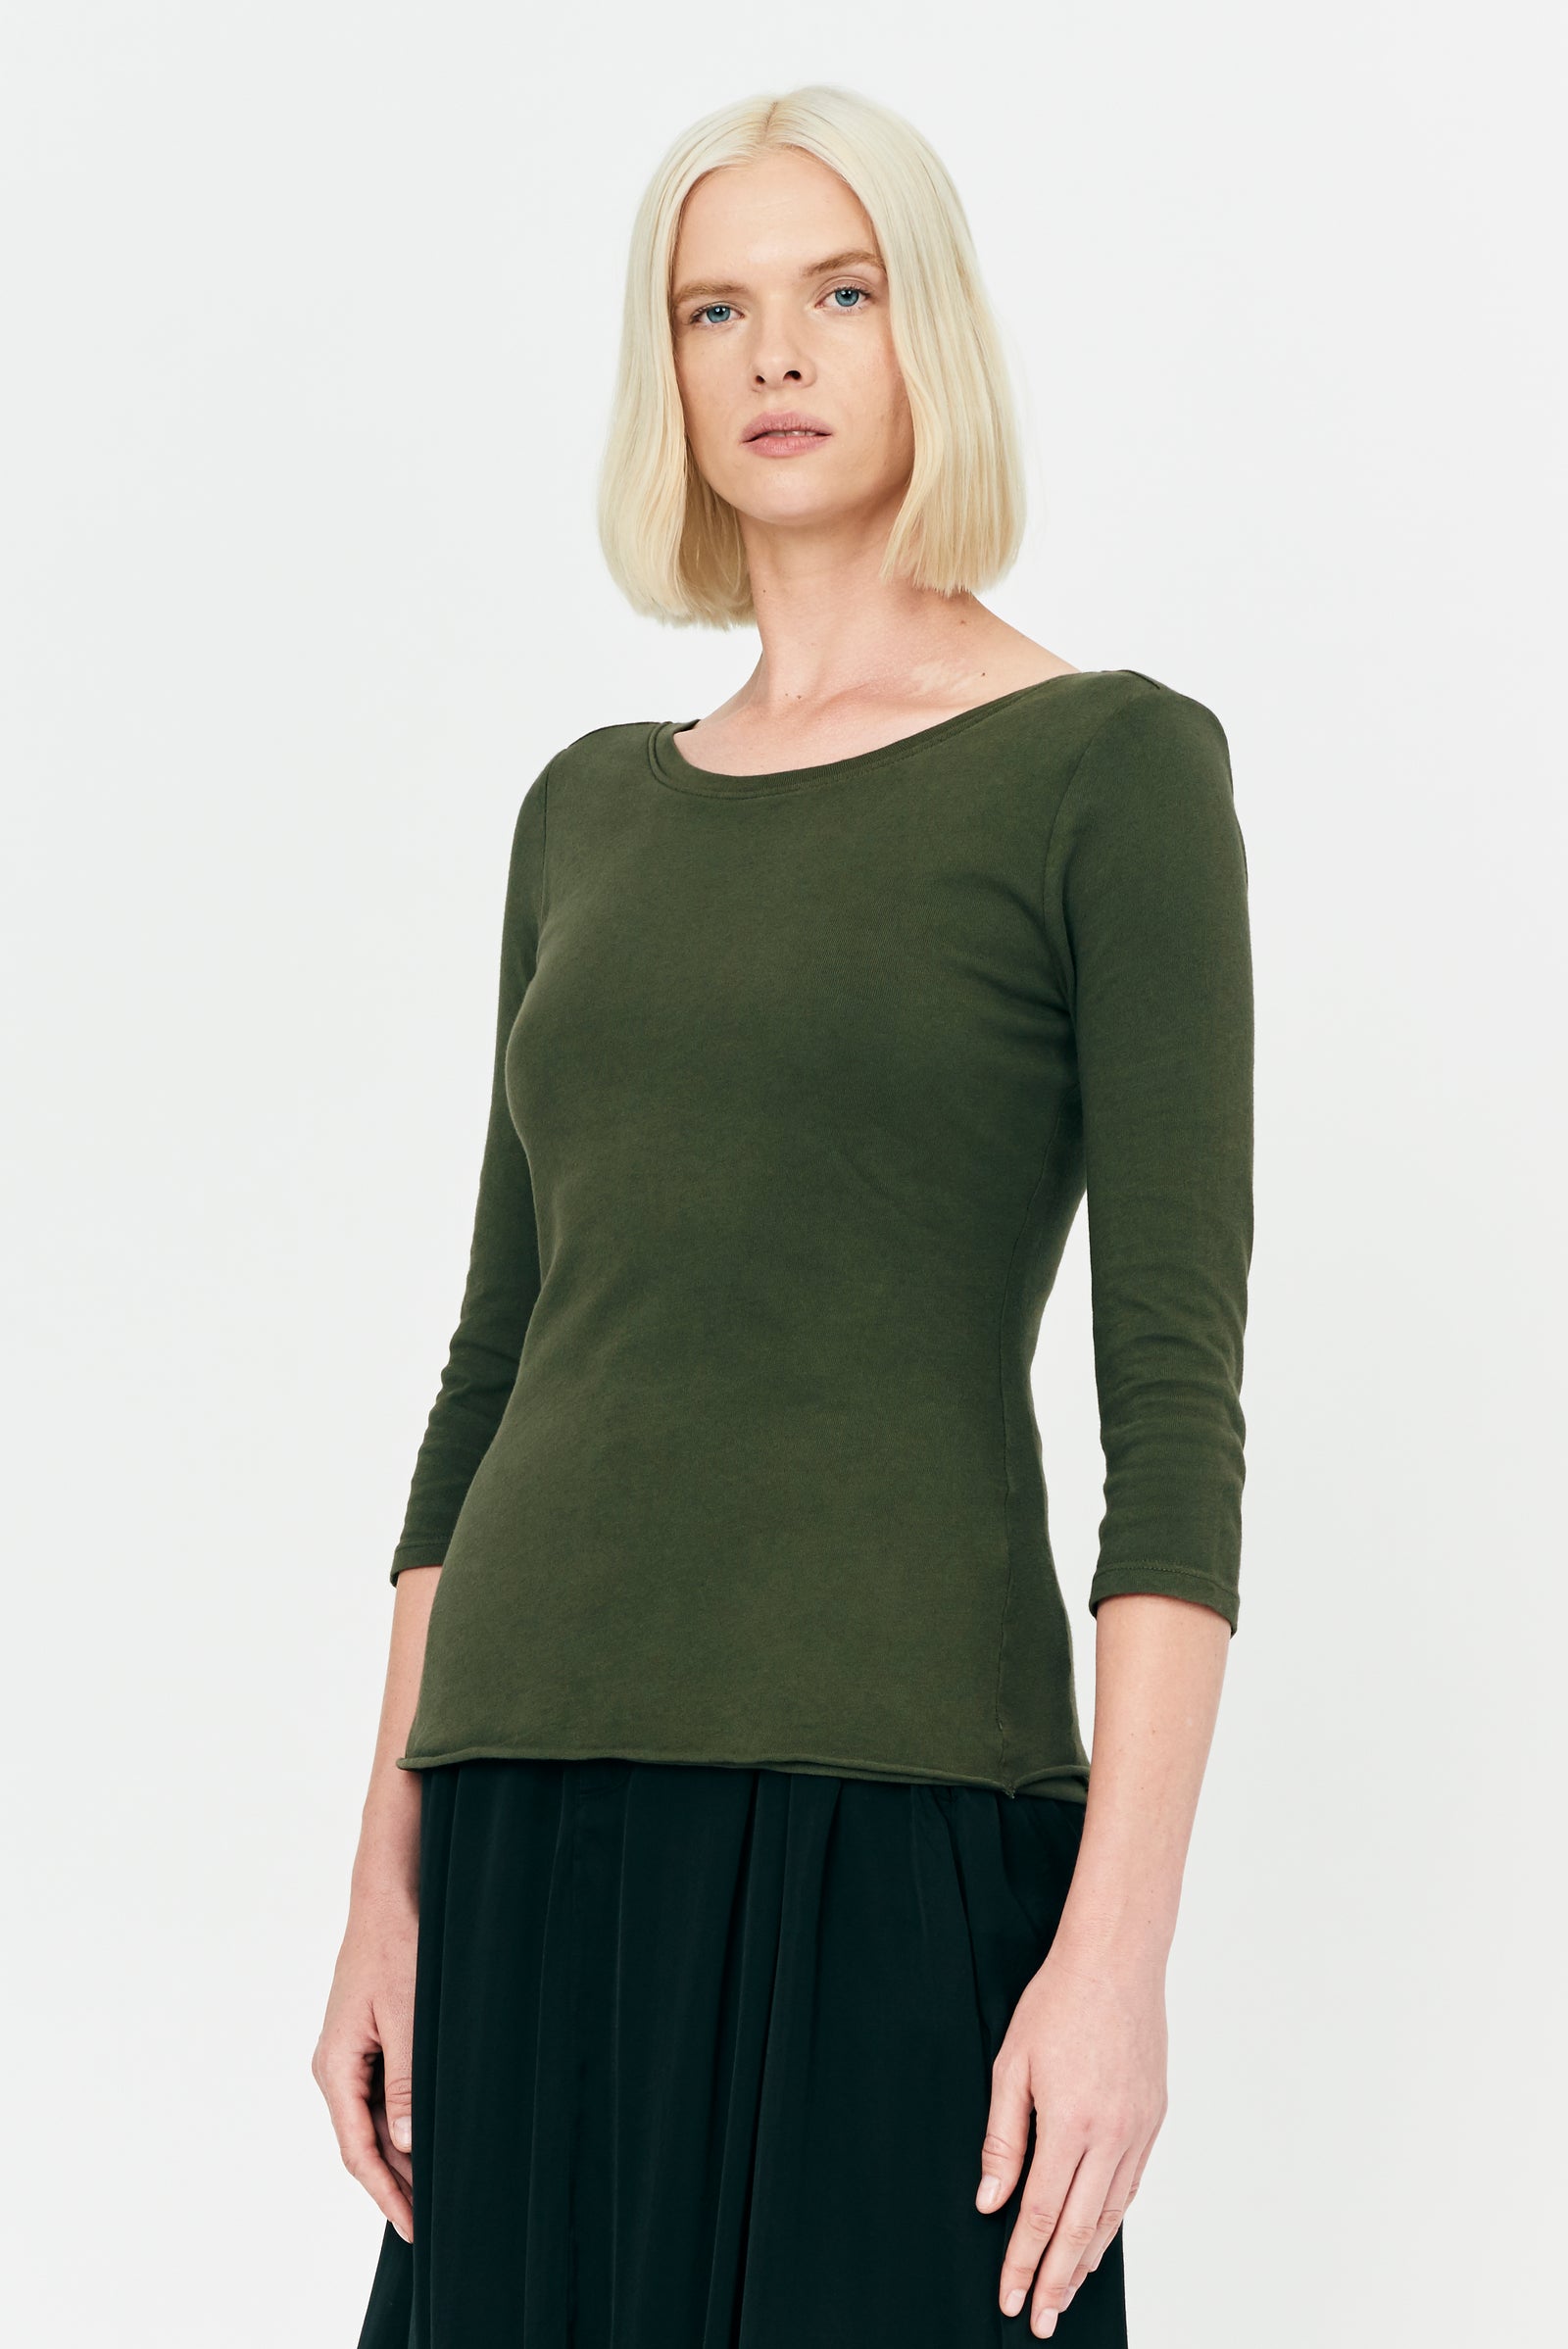 Sage Brush Classic Jersey Double Layer Top Front Close-Up View